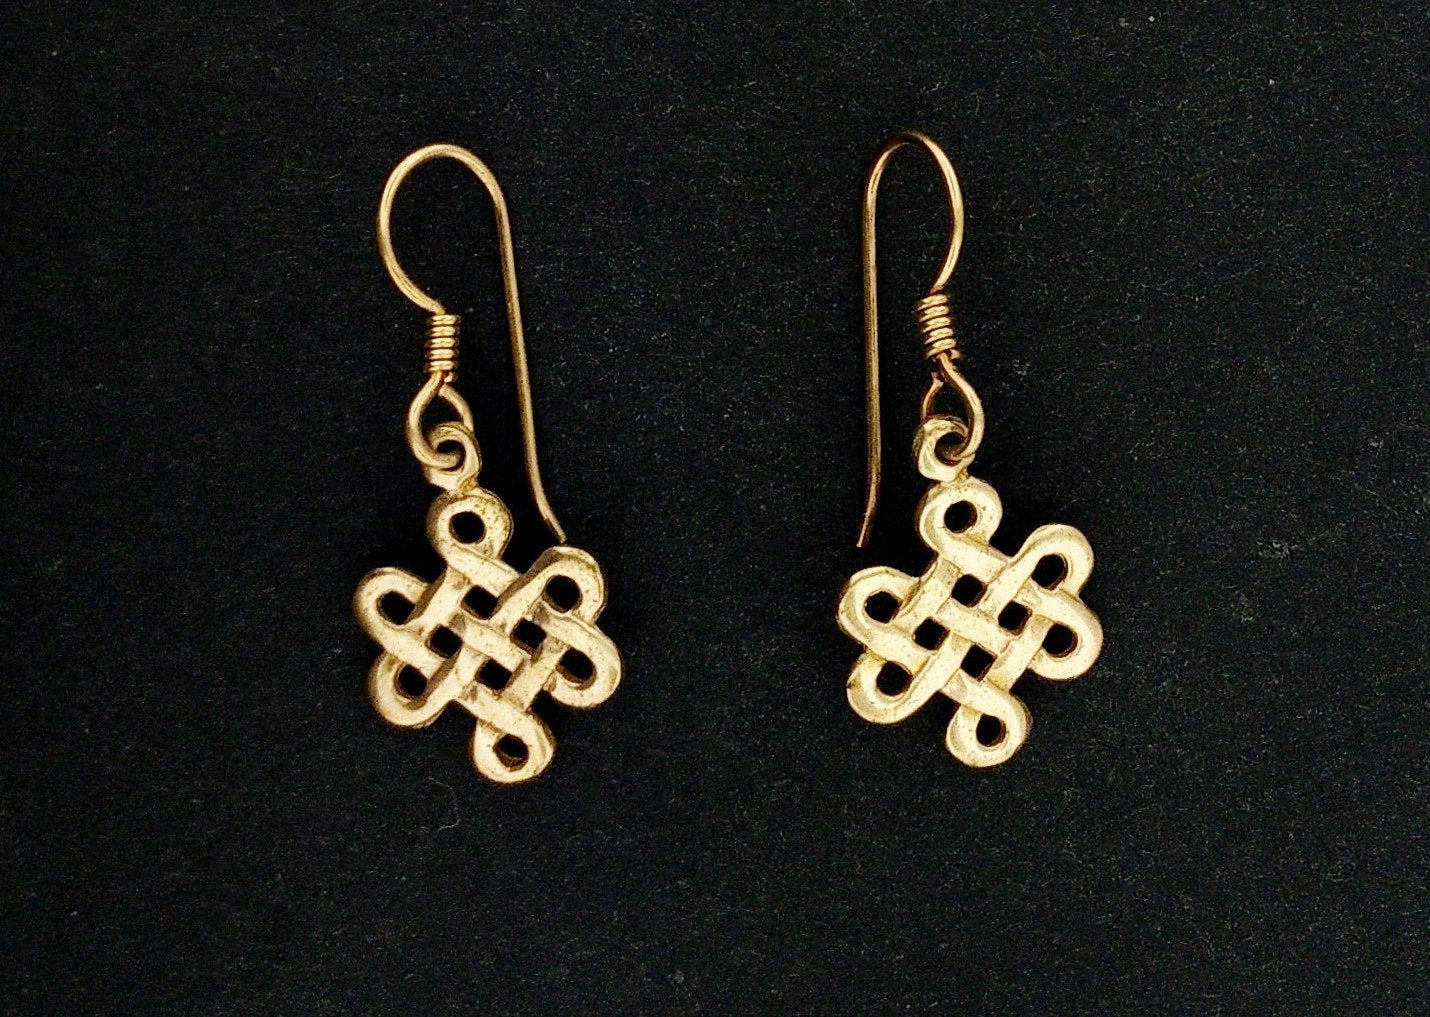 Small Endless Knot Earrings in Sterling Silver or Antique Bronze